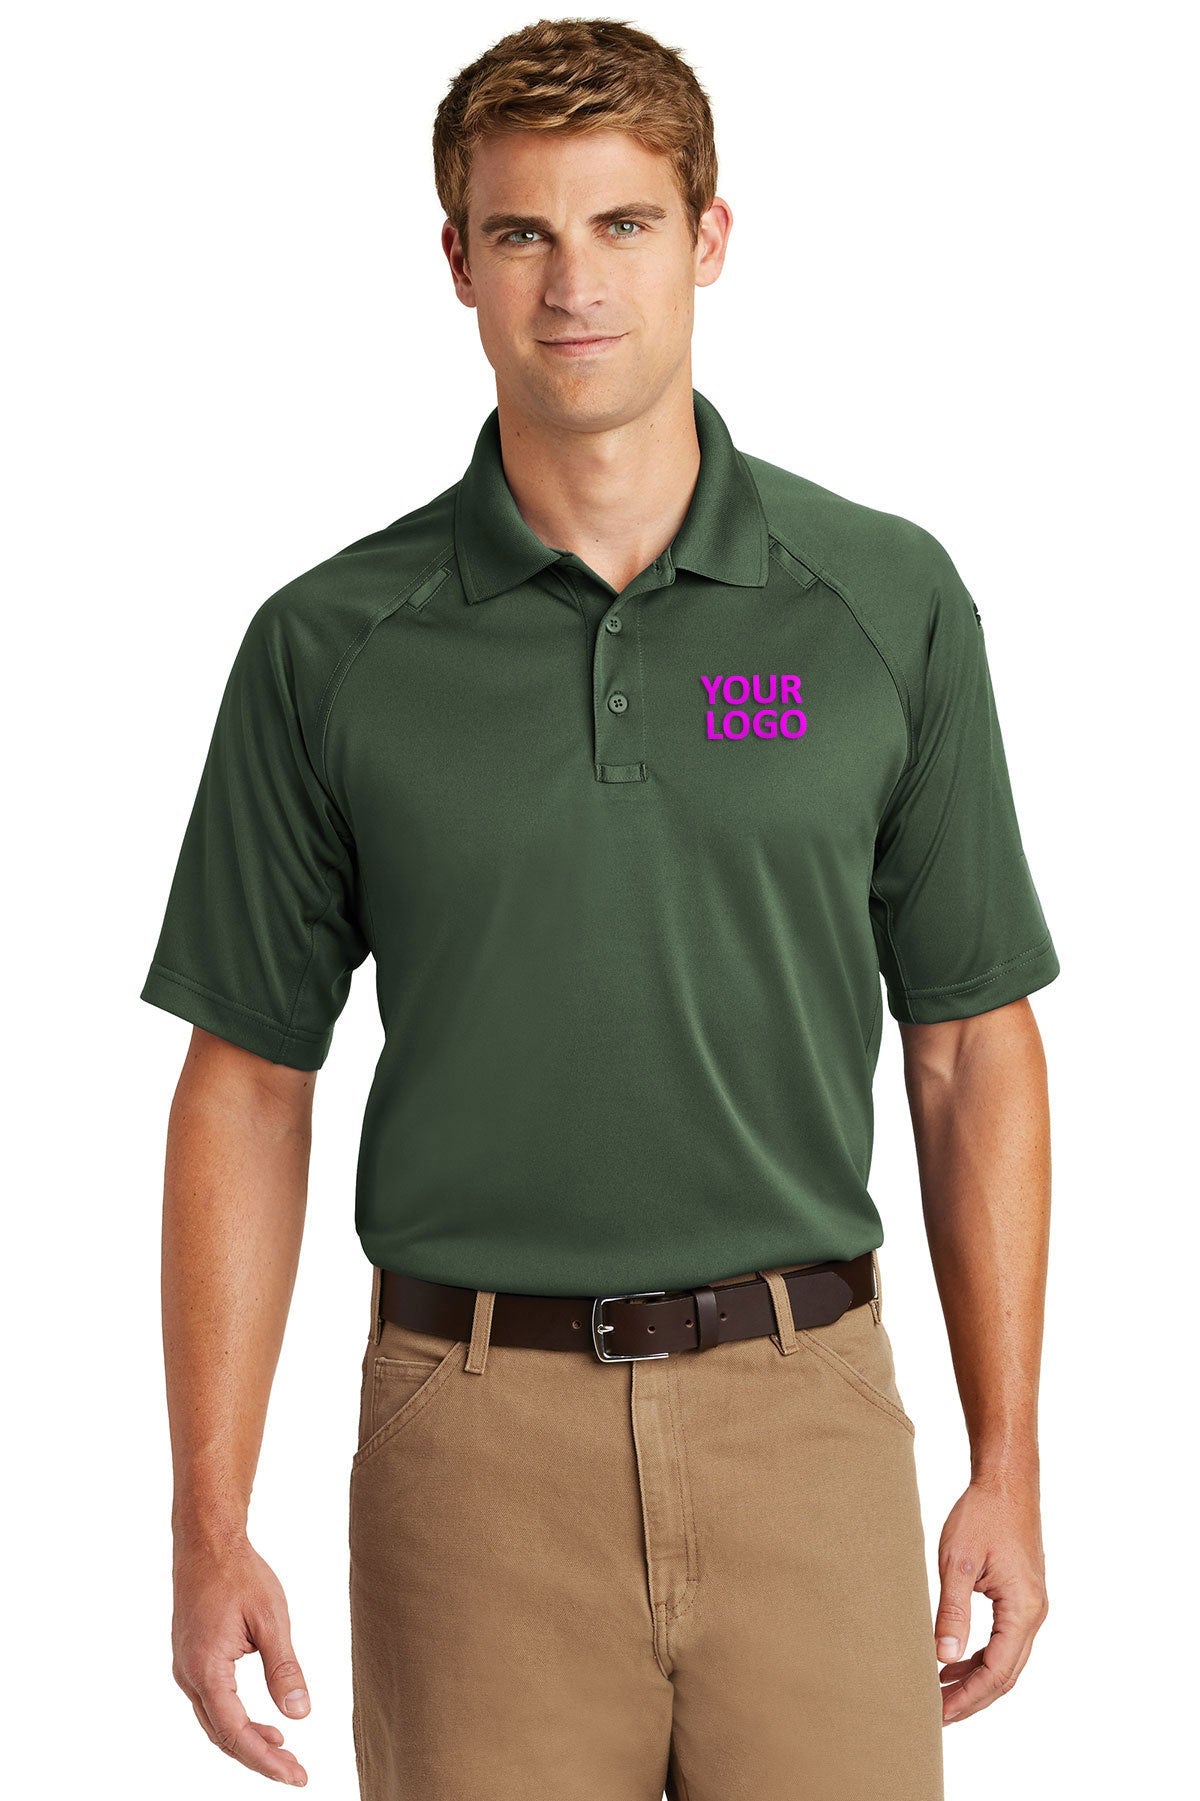 CornerStone Dark Green CS410 embroidered polo shirts for business